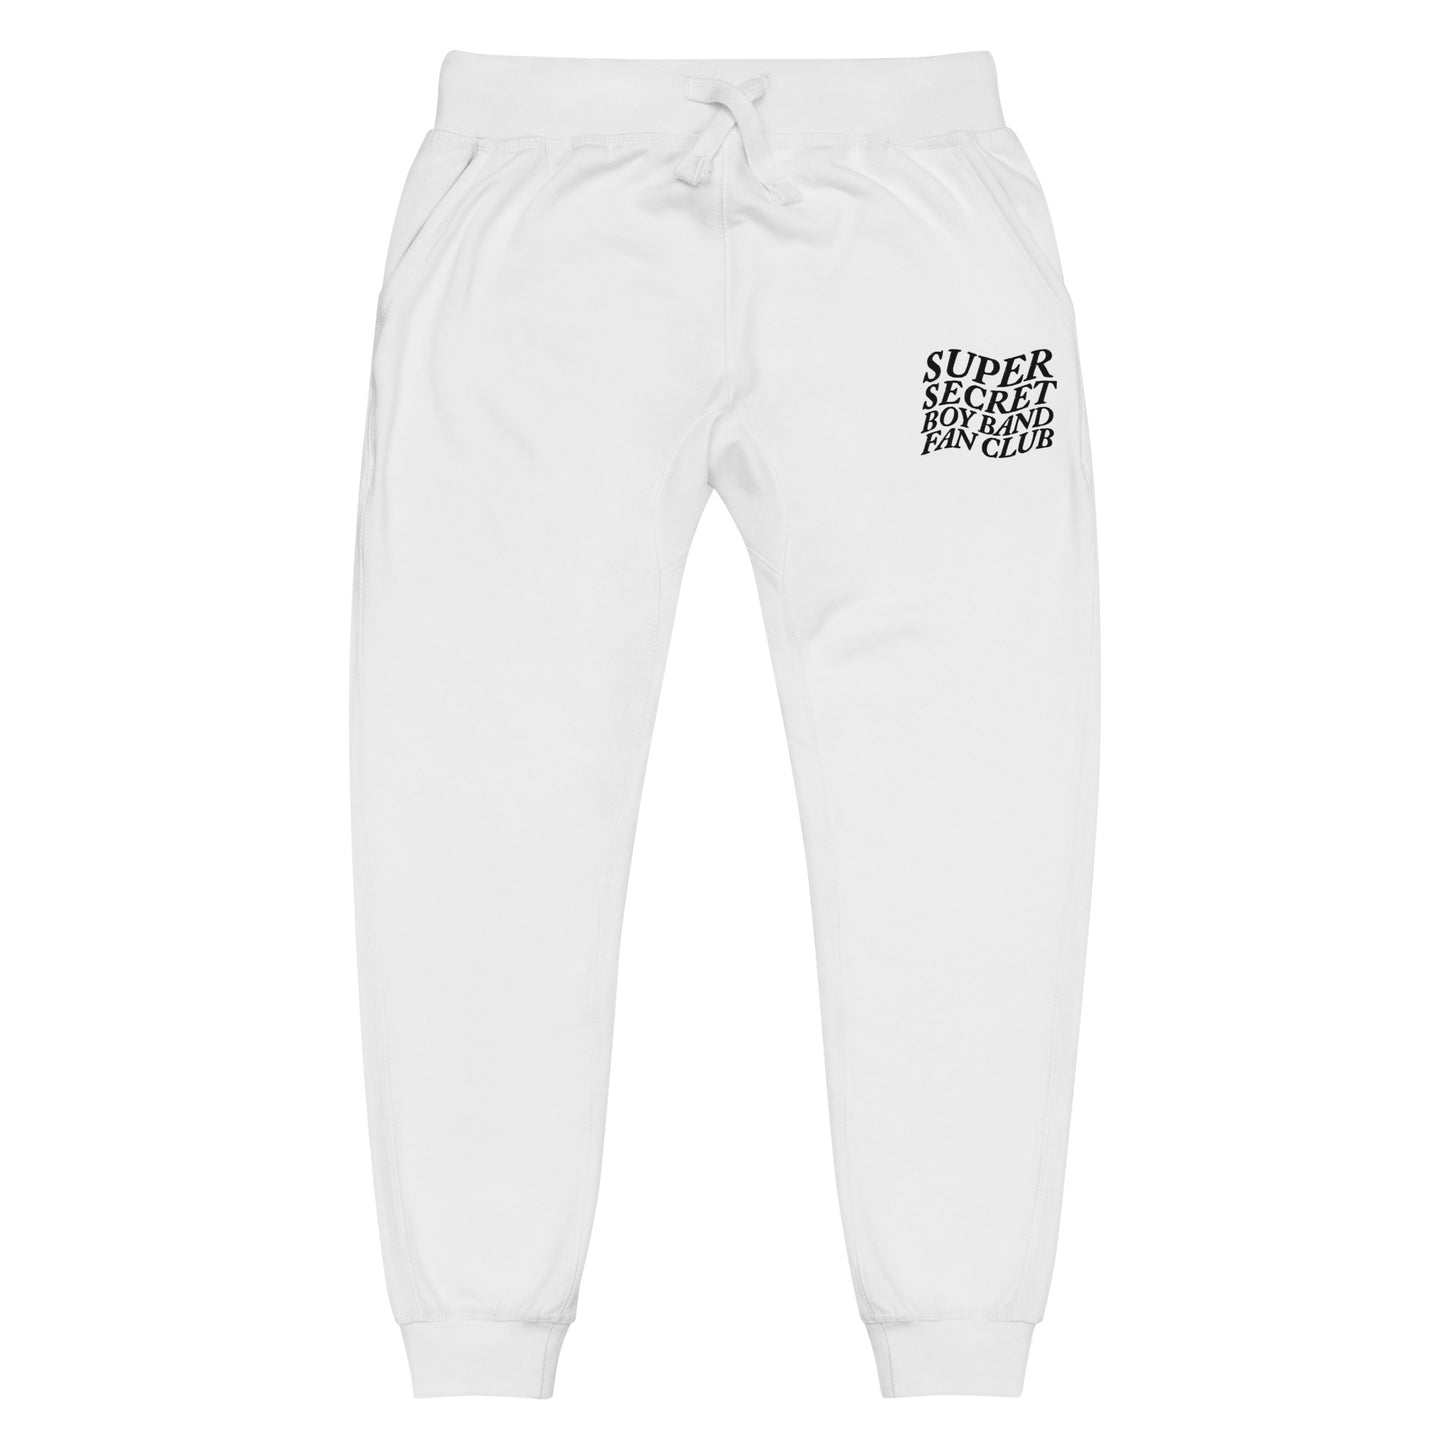 Heroes Fan Club Word Wave Embroidered Premium Sweatpants (Black Stitching)